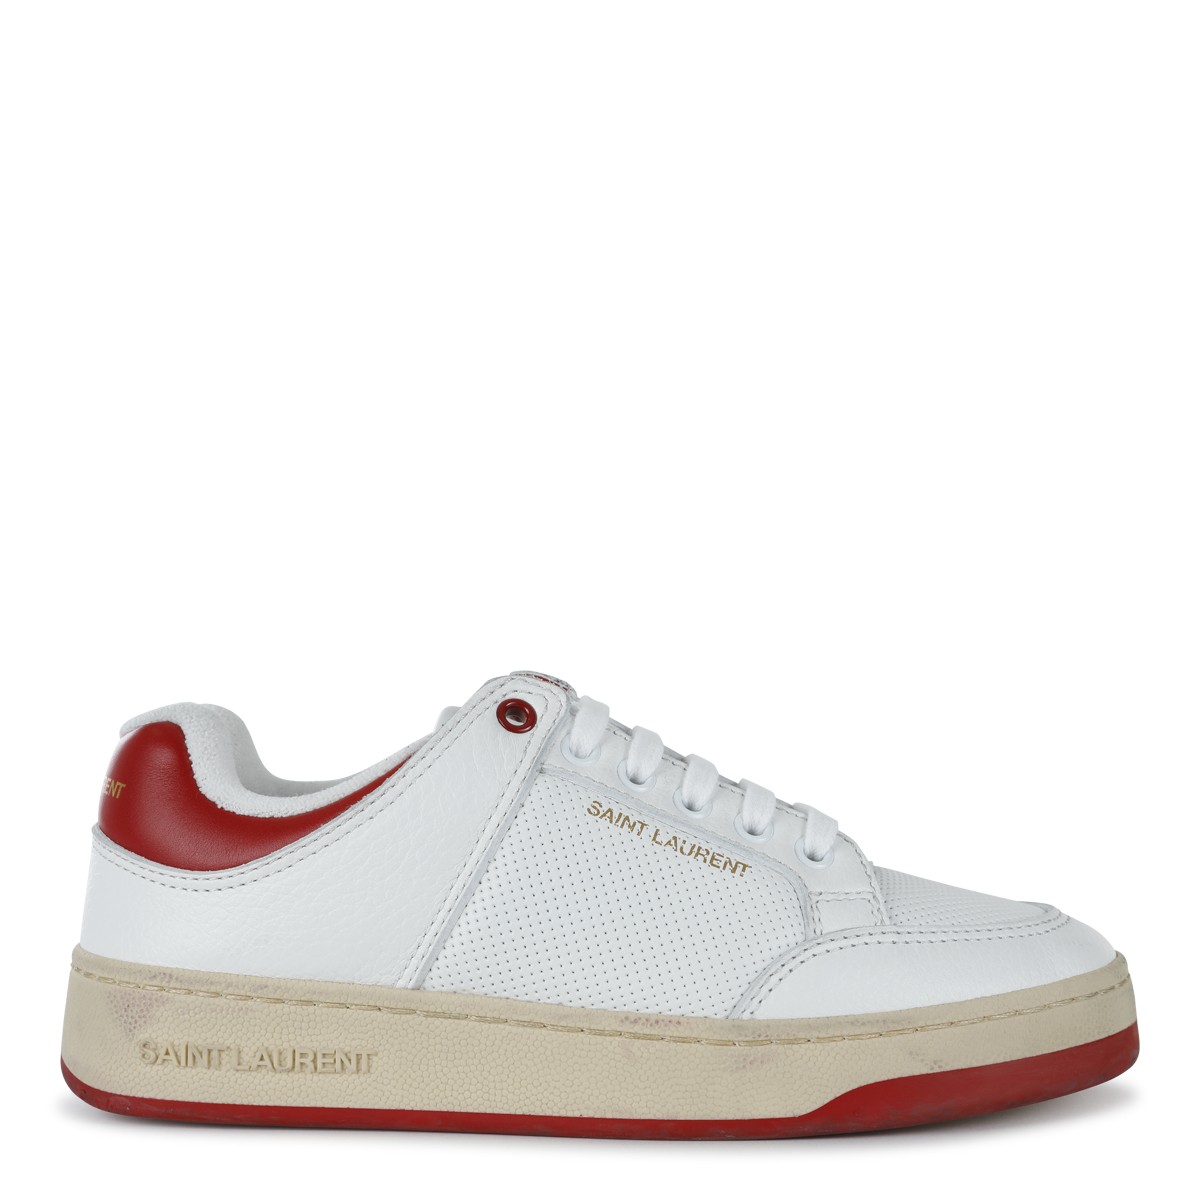 WHITE AND RED LEATHER SL/61 SNEAKERS